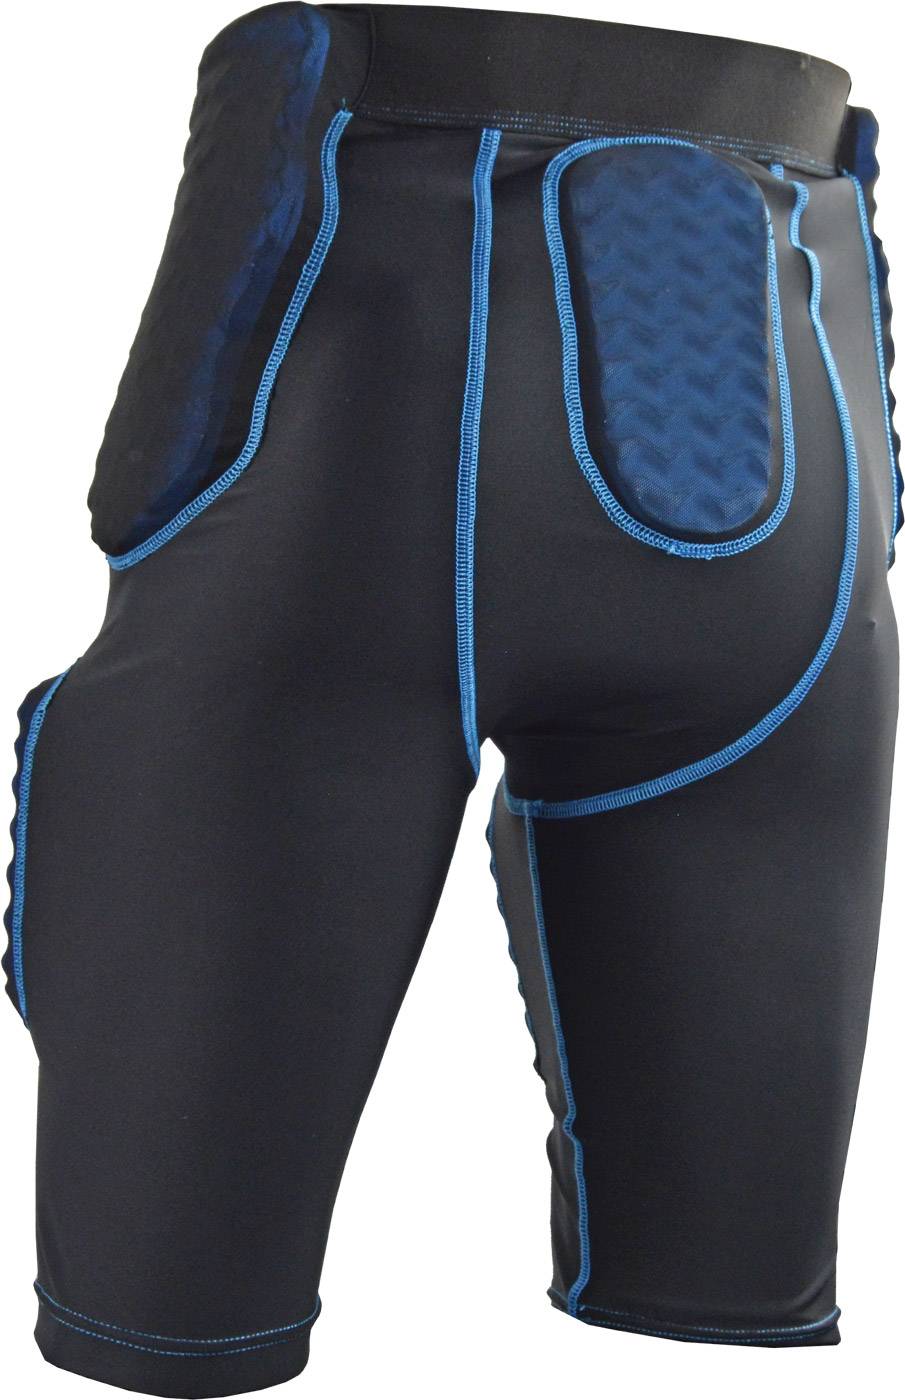 Sports Unlimited Adult 5 Pad Integrated Football Girdle 2.0 